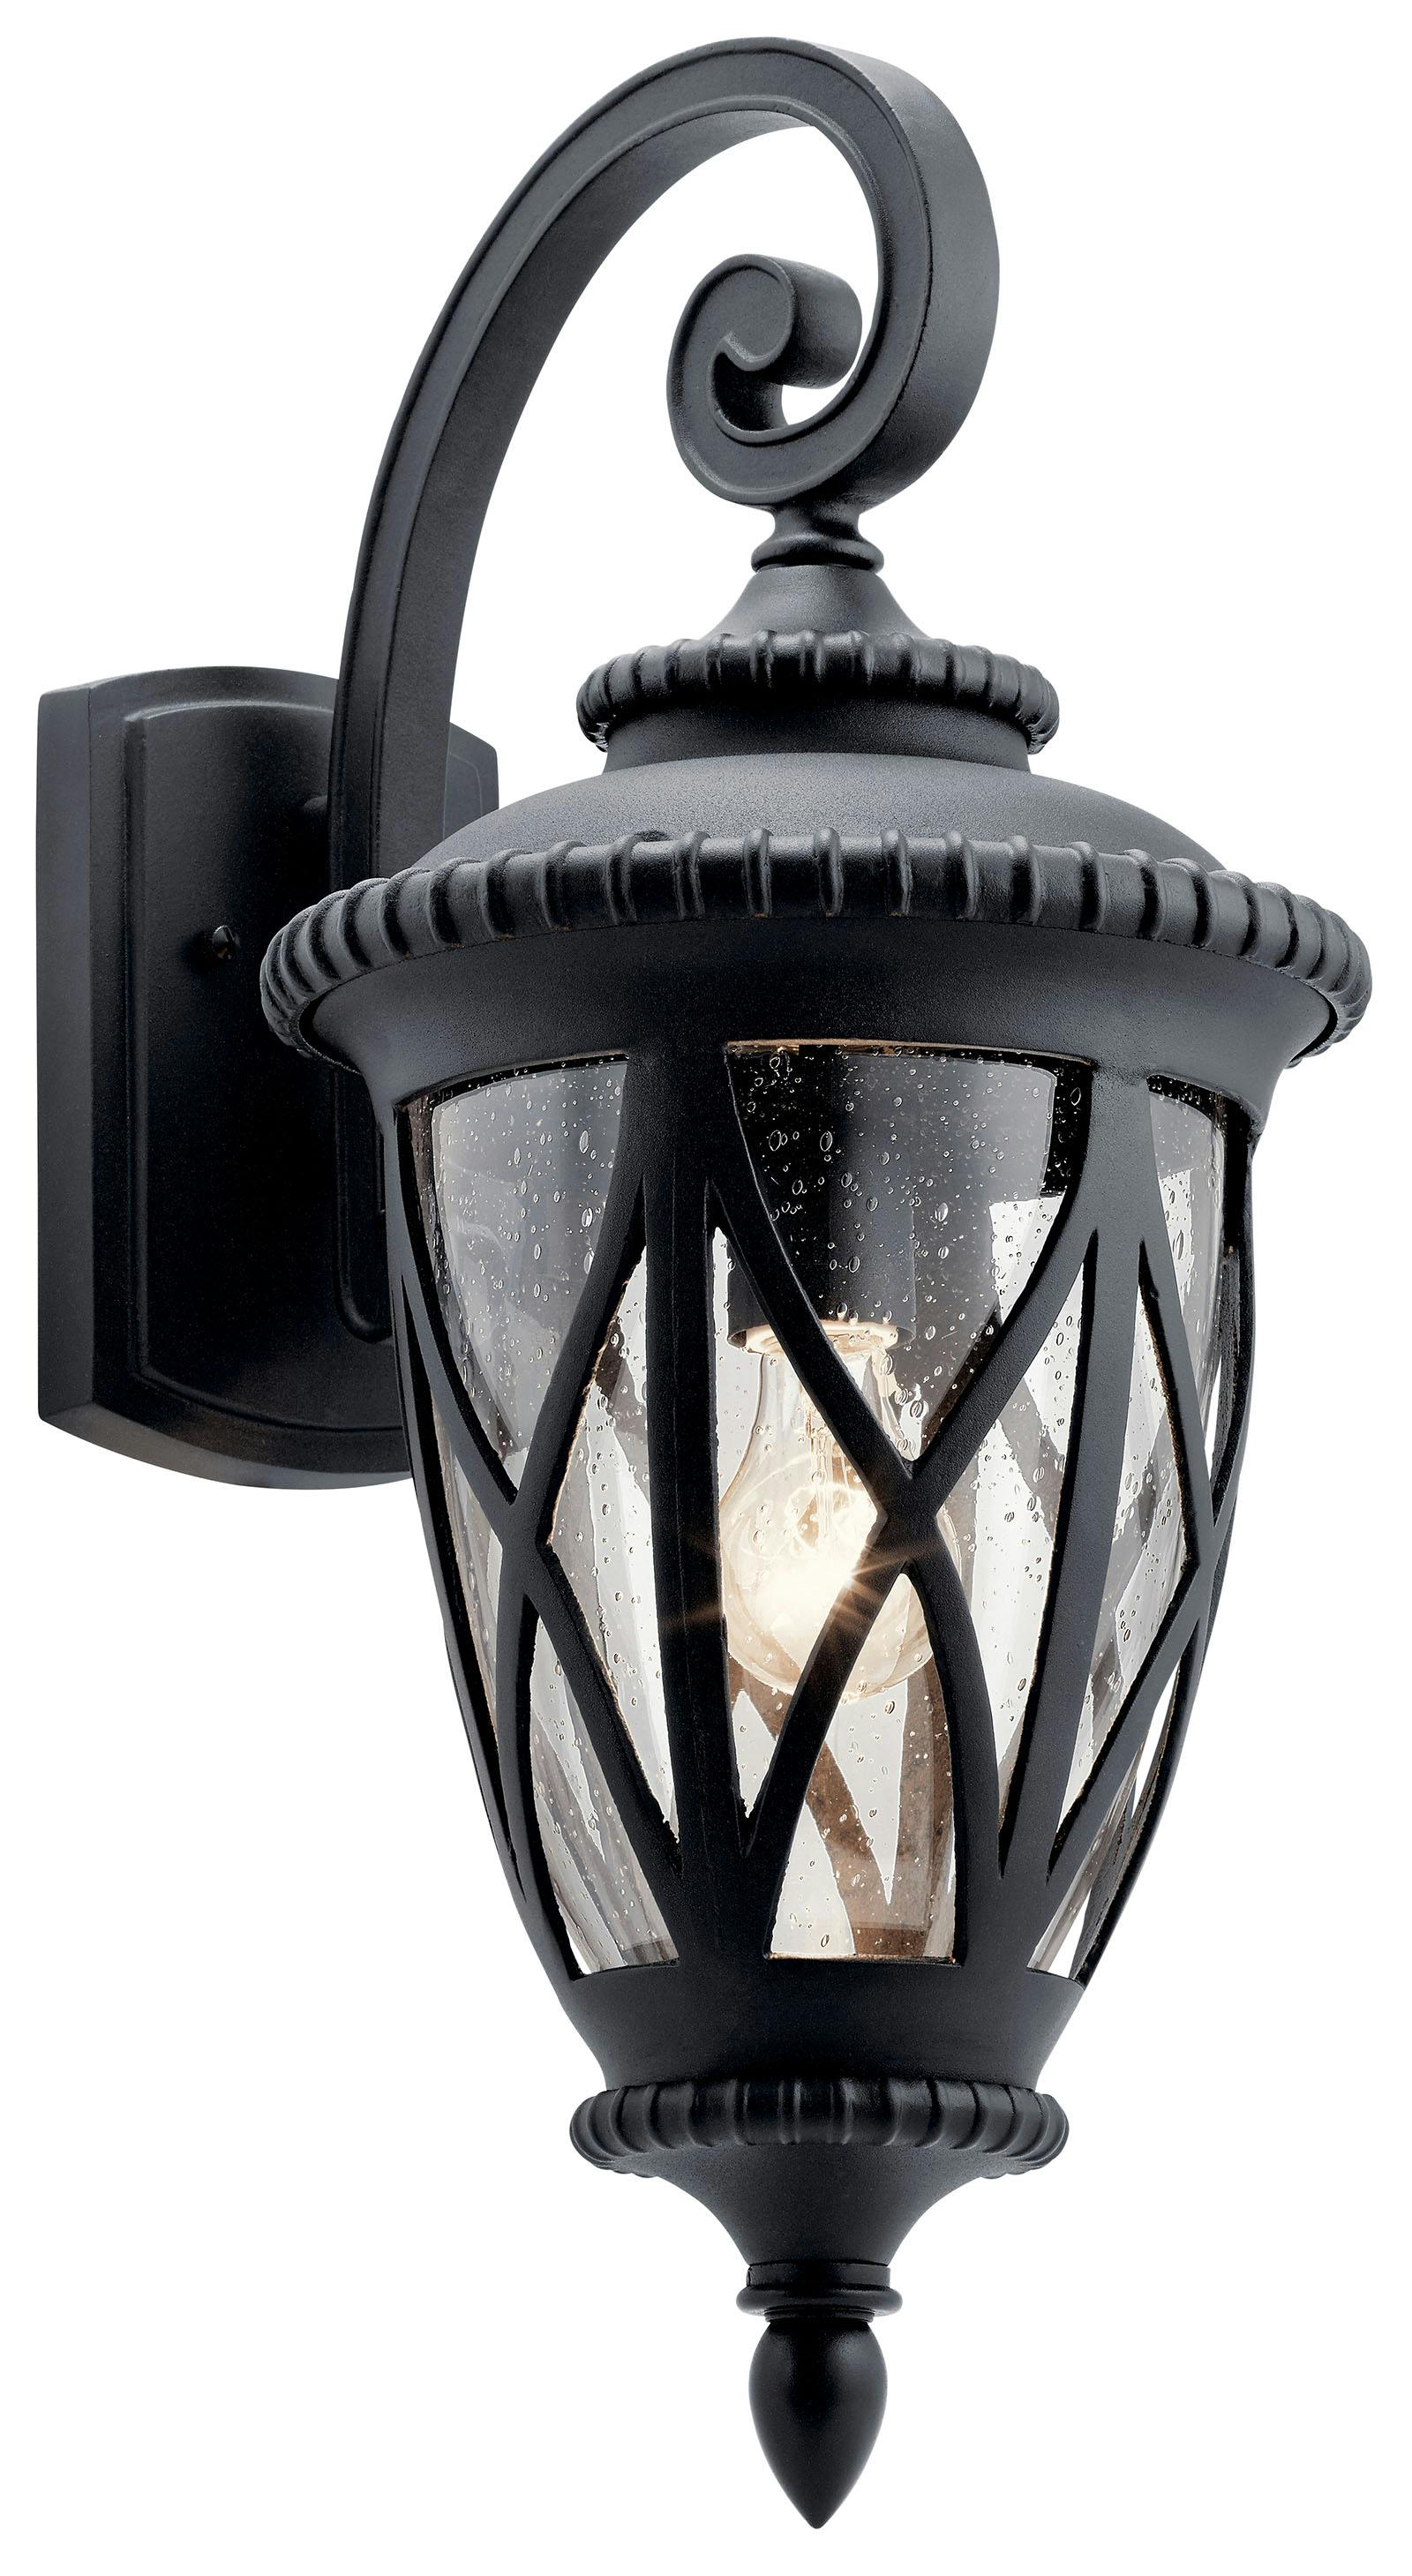 Admirals Cove 1 Light Wall Light Black on a white background